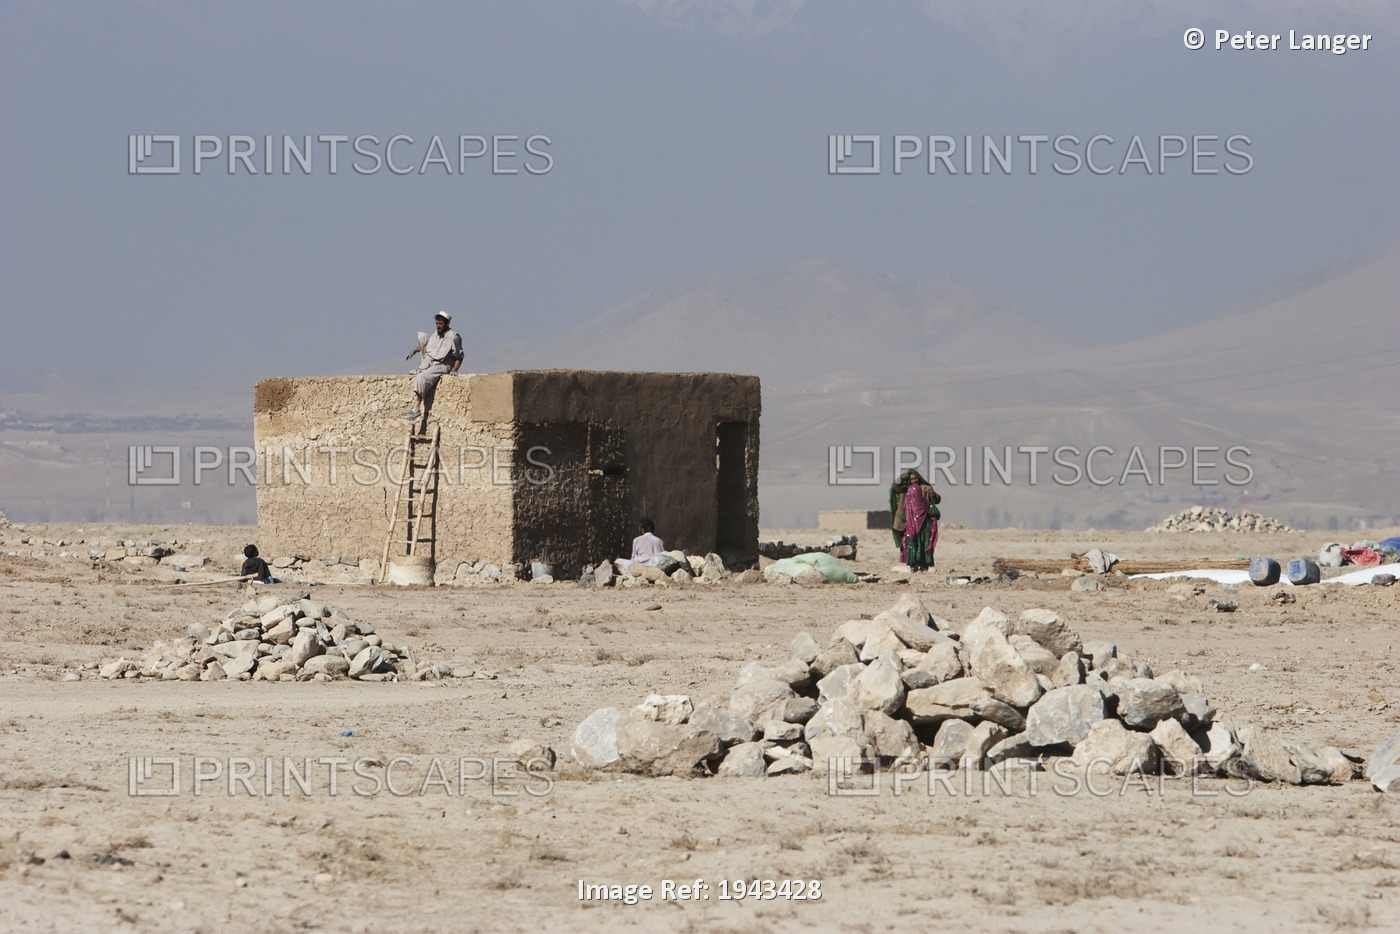 Man And Woman By A Brick House In The Outskirts Of Kabul, Afghanistan